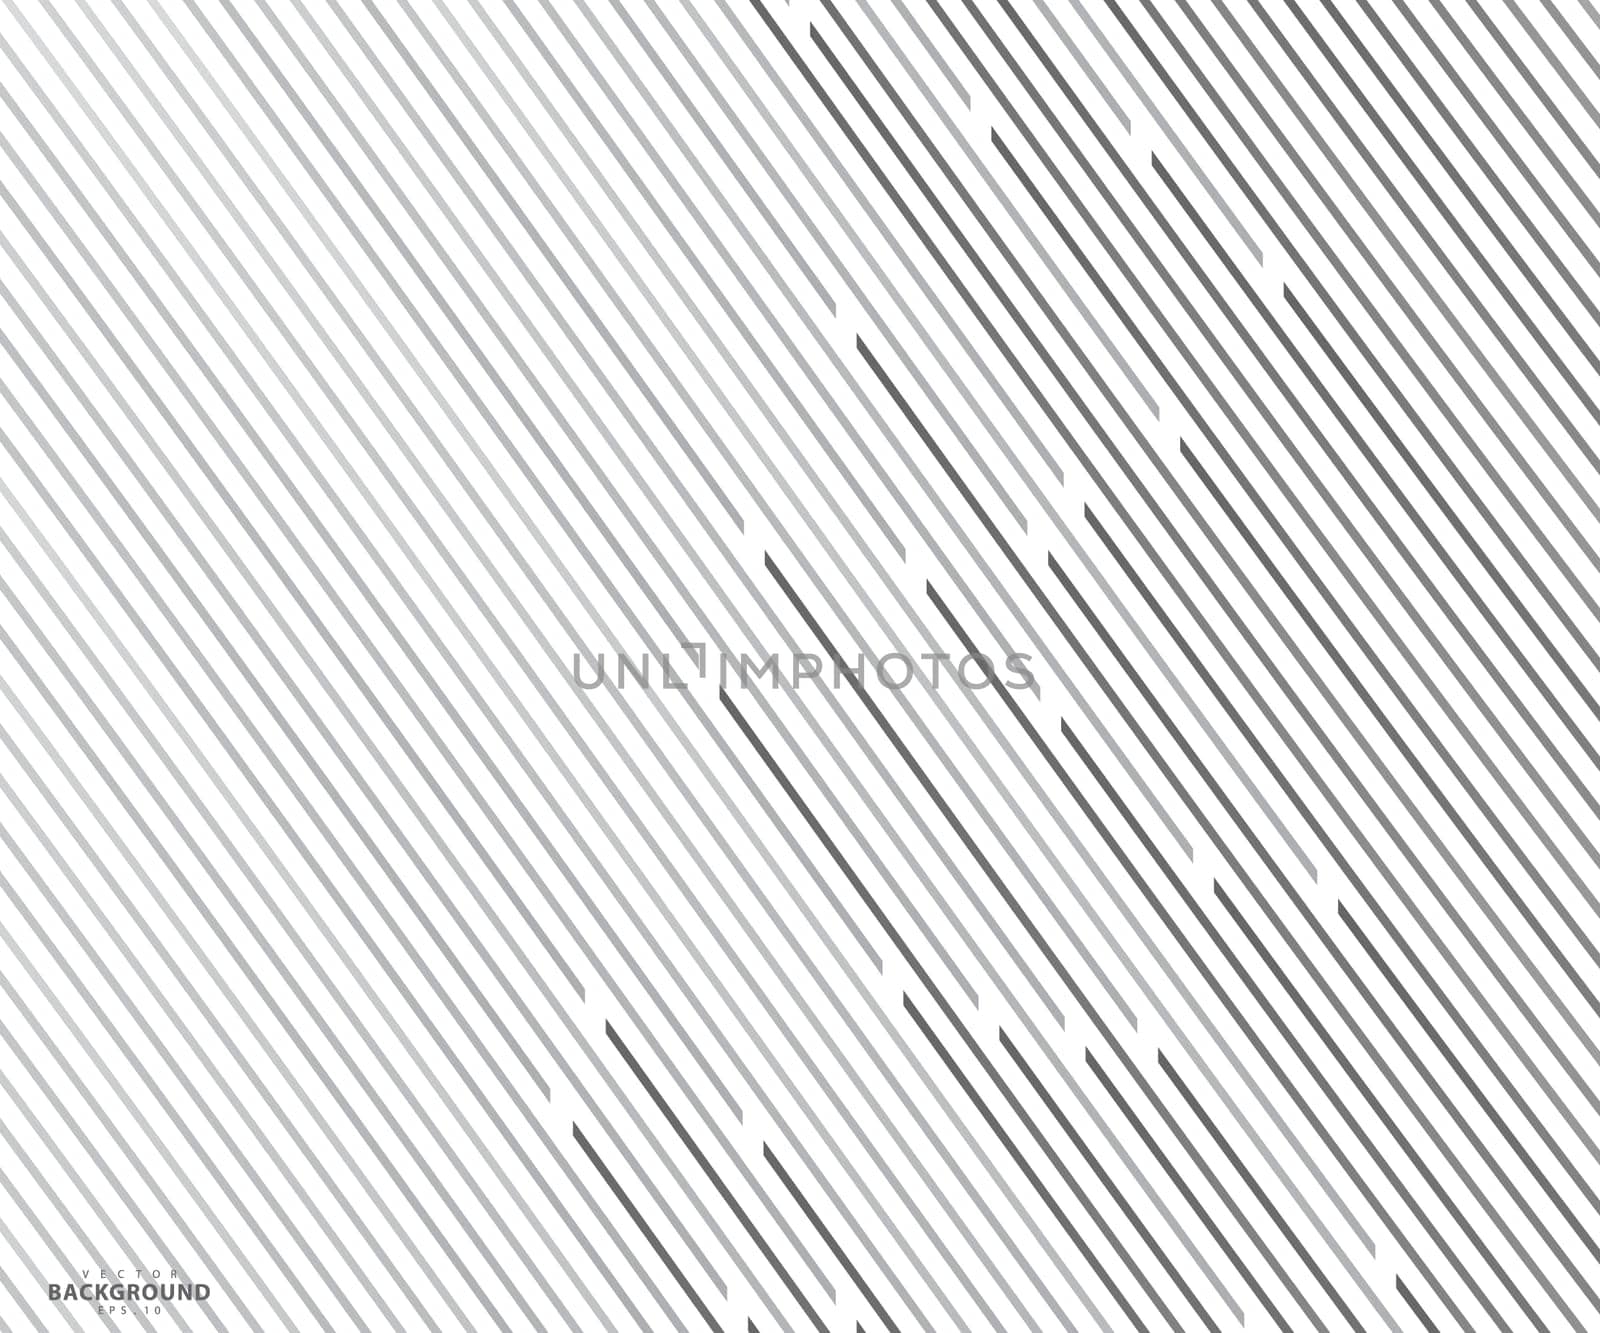 Striped texture, Abstract warped Diagonal Striped Background, wave lines texture. Brand new style for your business design, vector template for your ideas by Rodseng